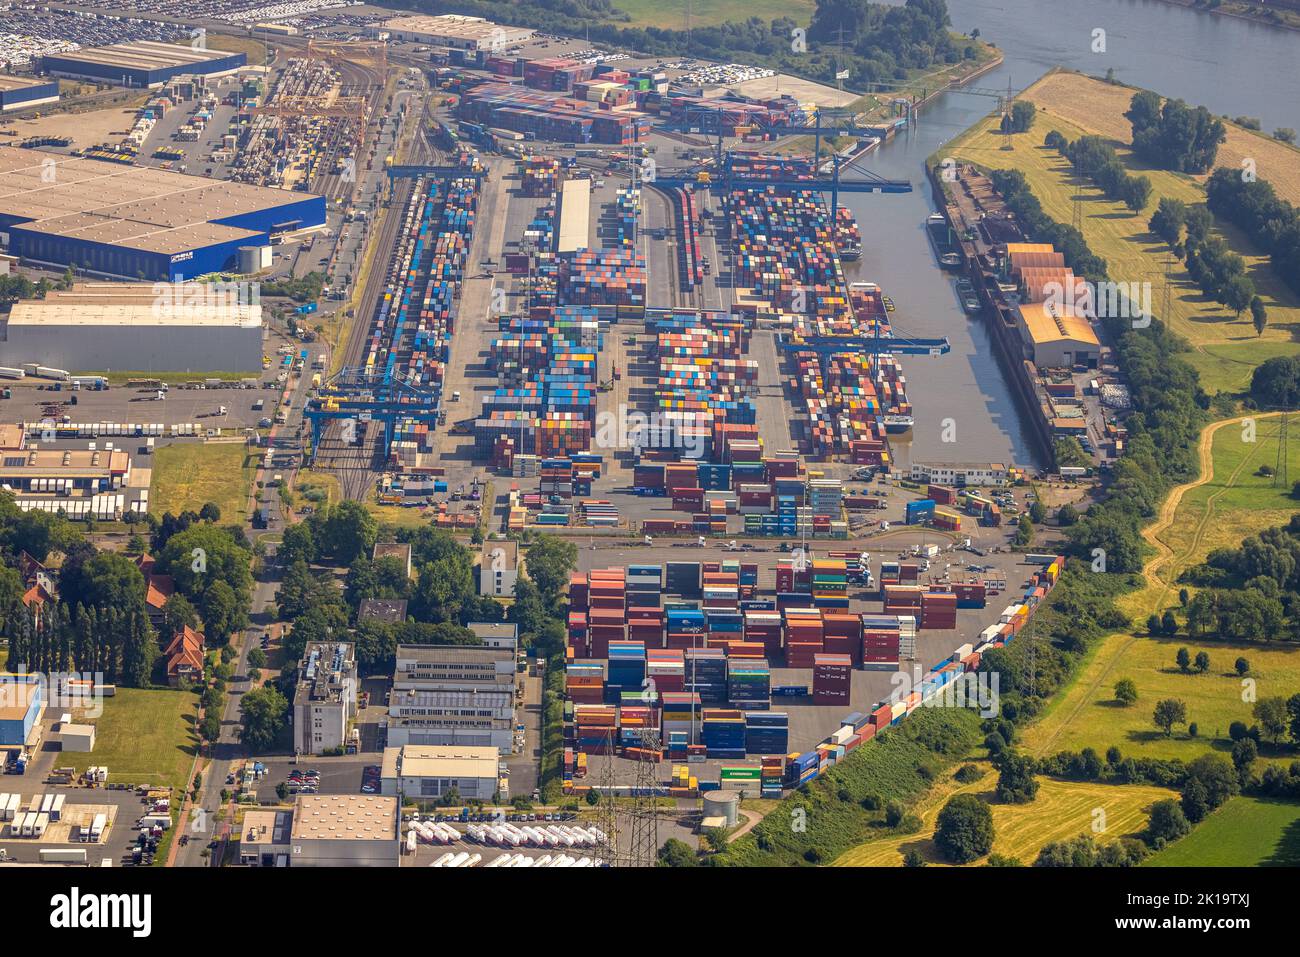 Aerial view, logport I, container port, D3T Duisburg Trimodal Terminal, Friemersheim, Duisburg, Ruhr area, North Rhine-Westphalia, Germany, Container, Stock Photo